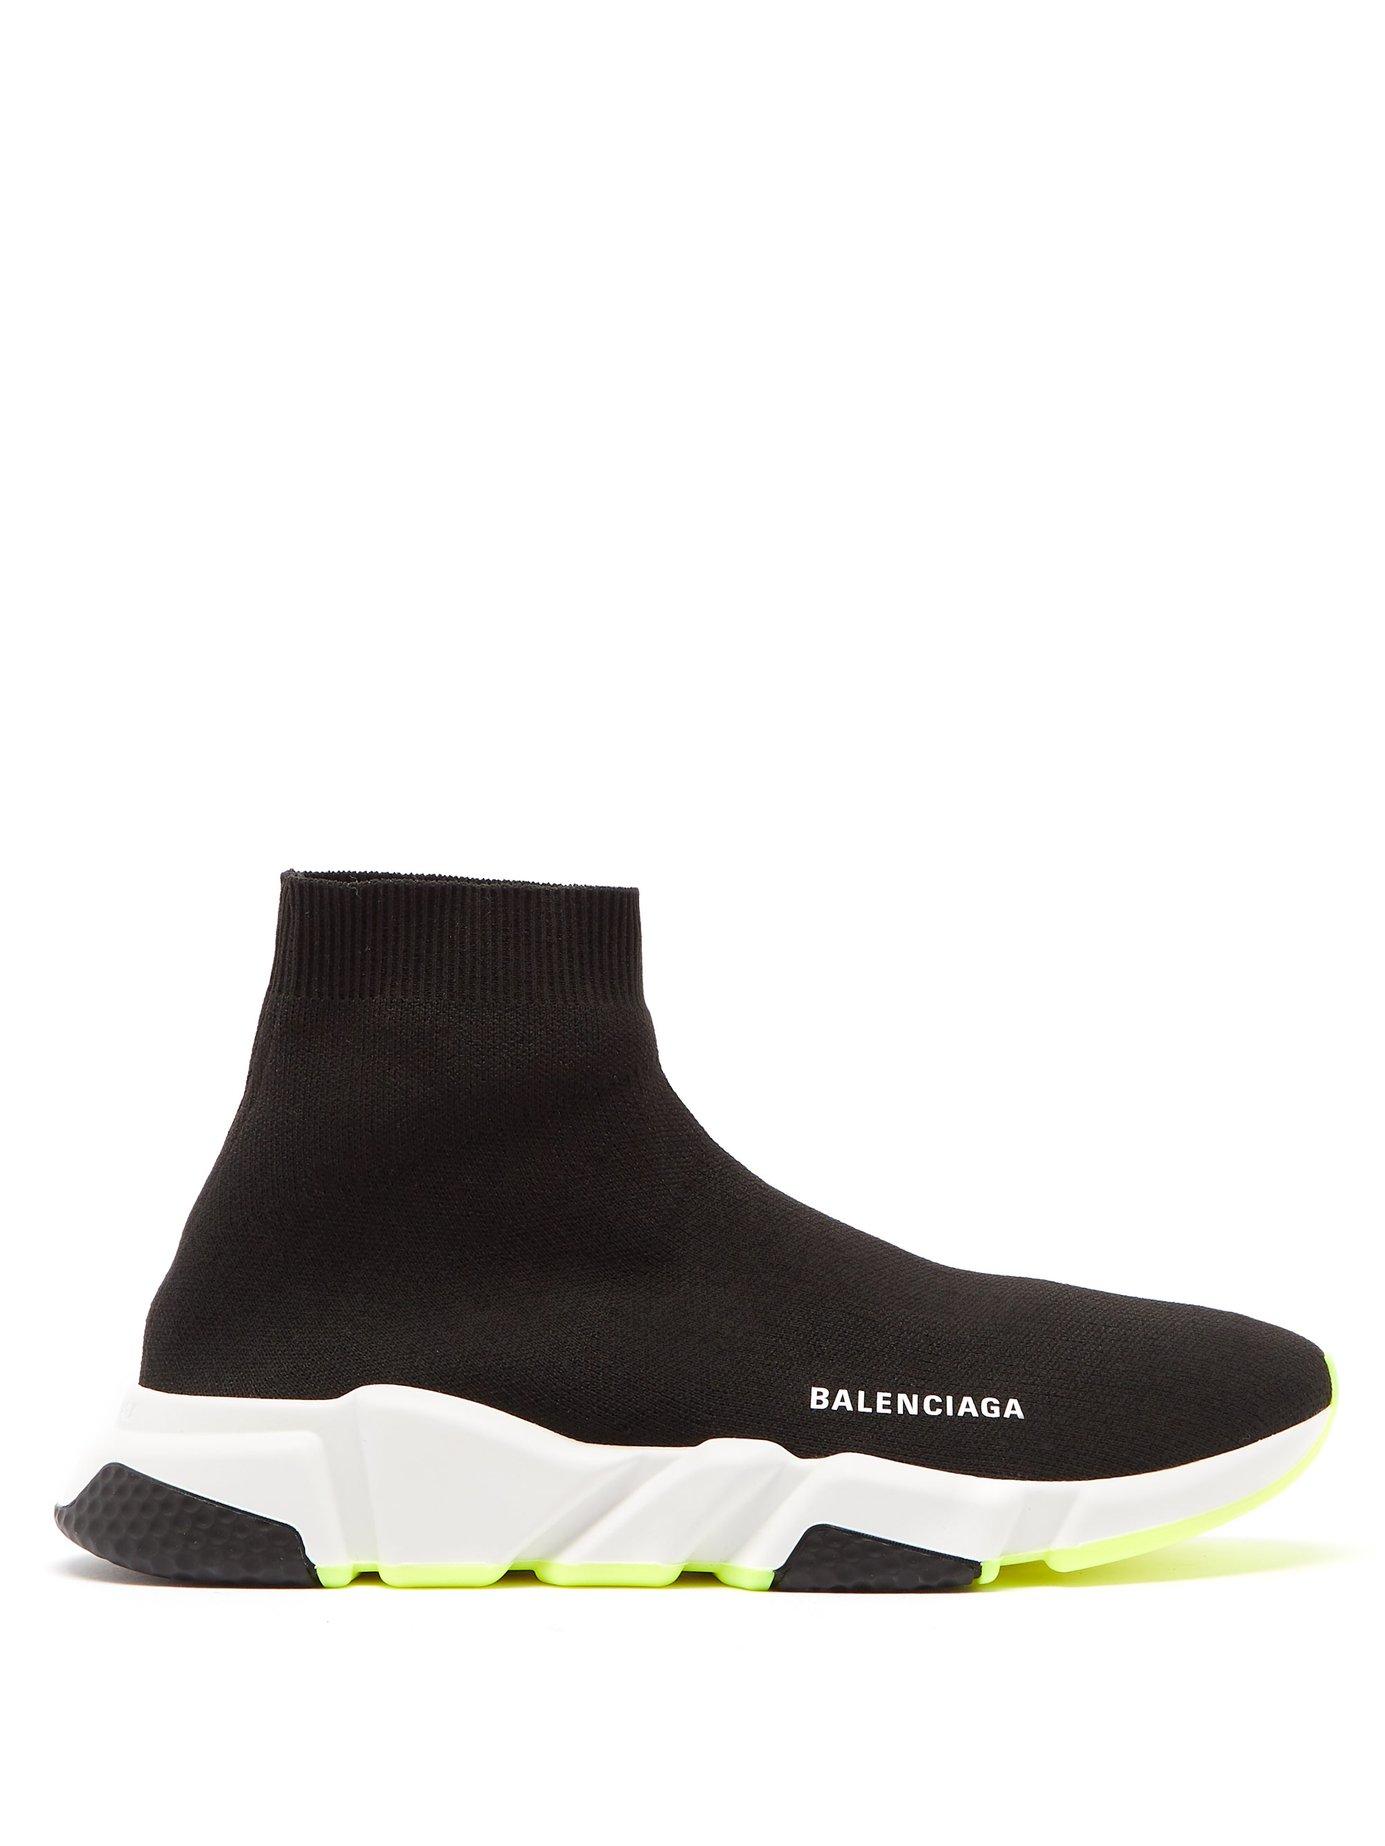 Balenciaga Speed Trainers in Black for Men - Lyst